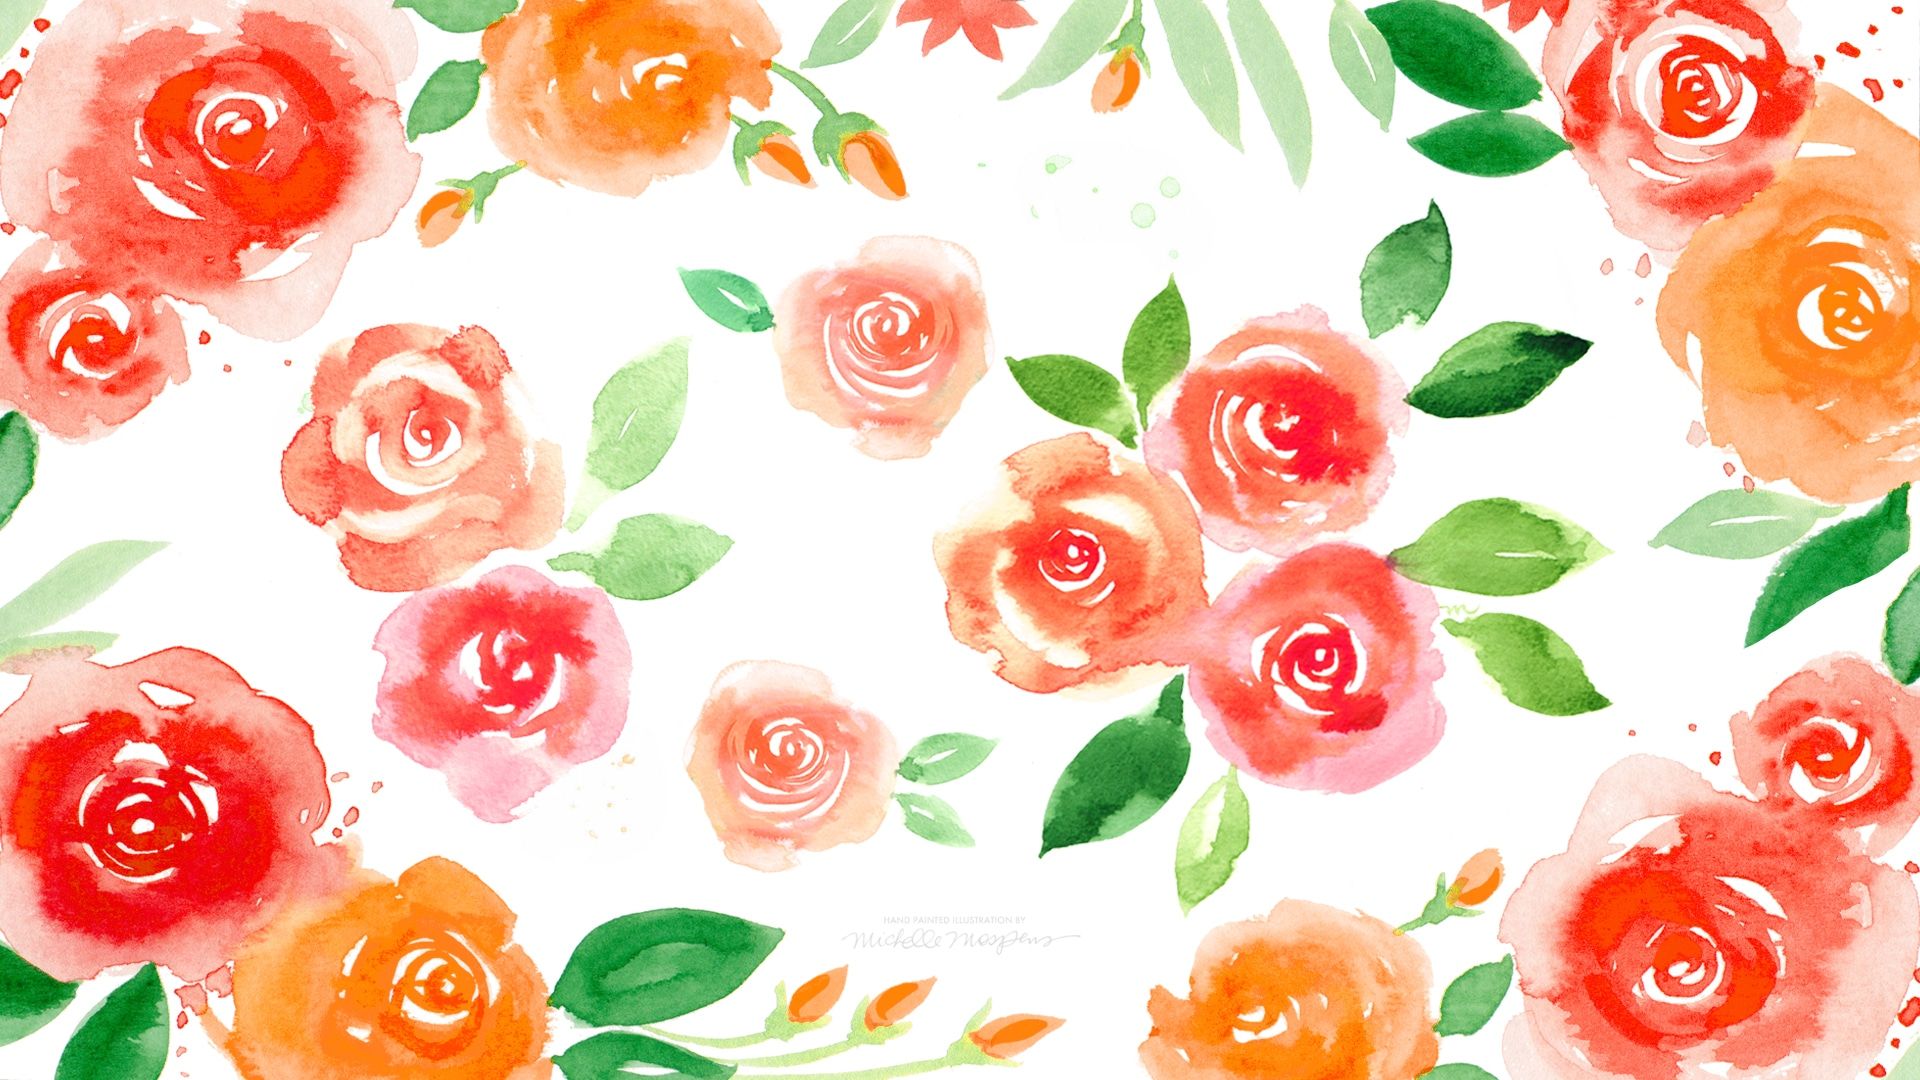 Floral Backgrounds High Resolution.